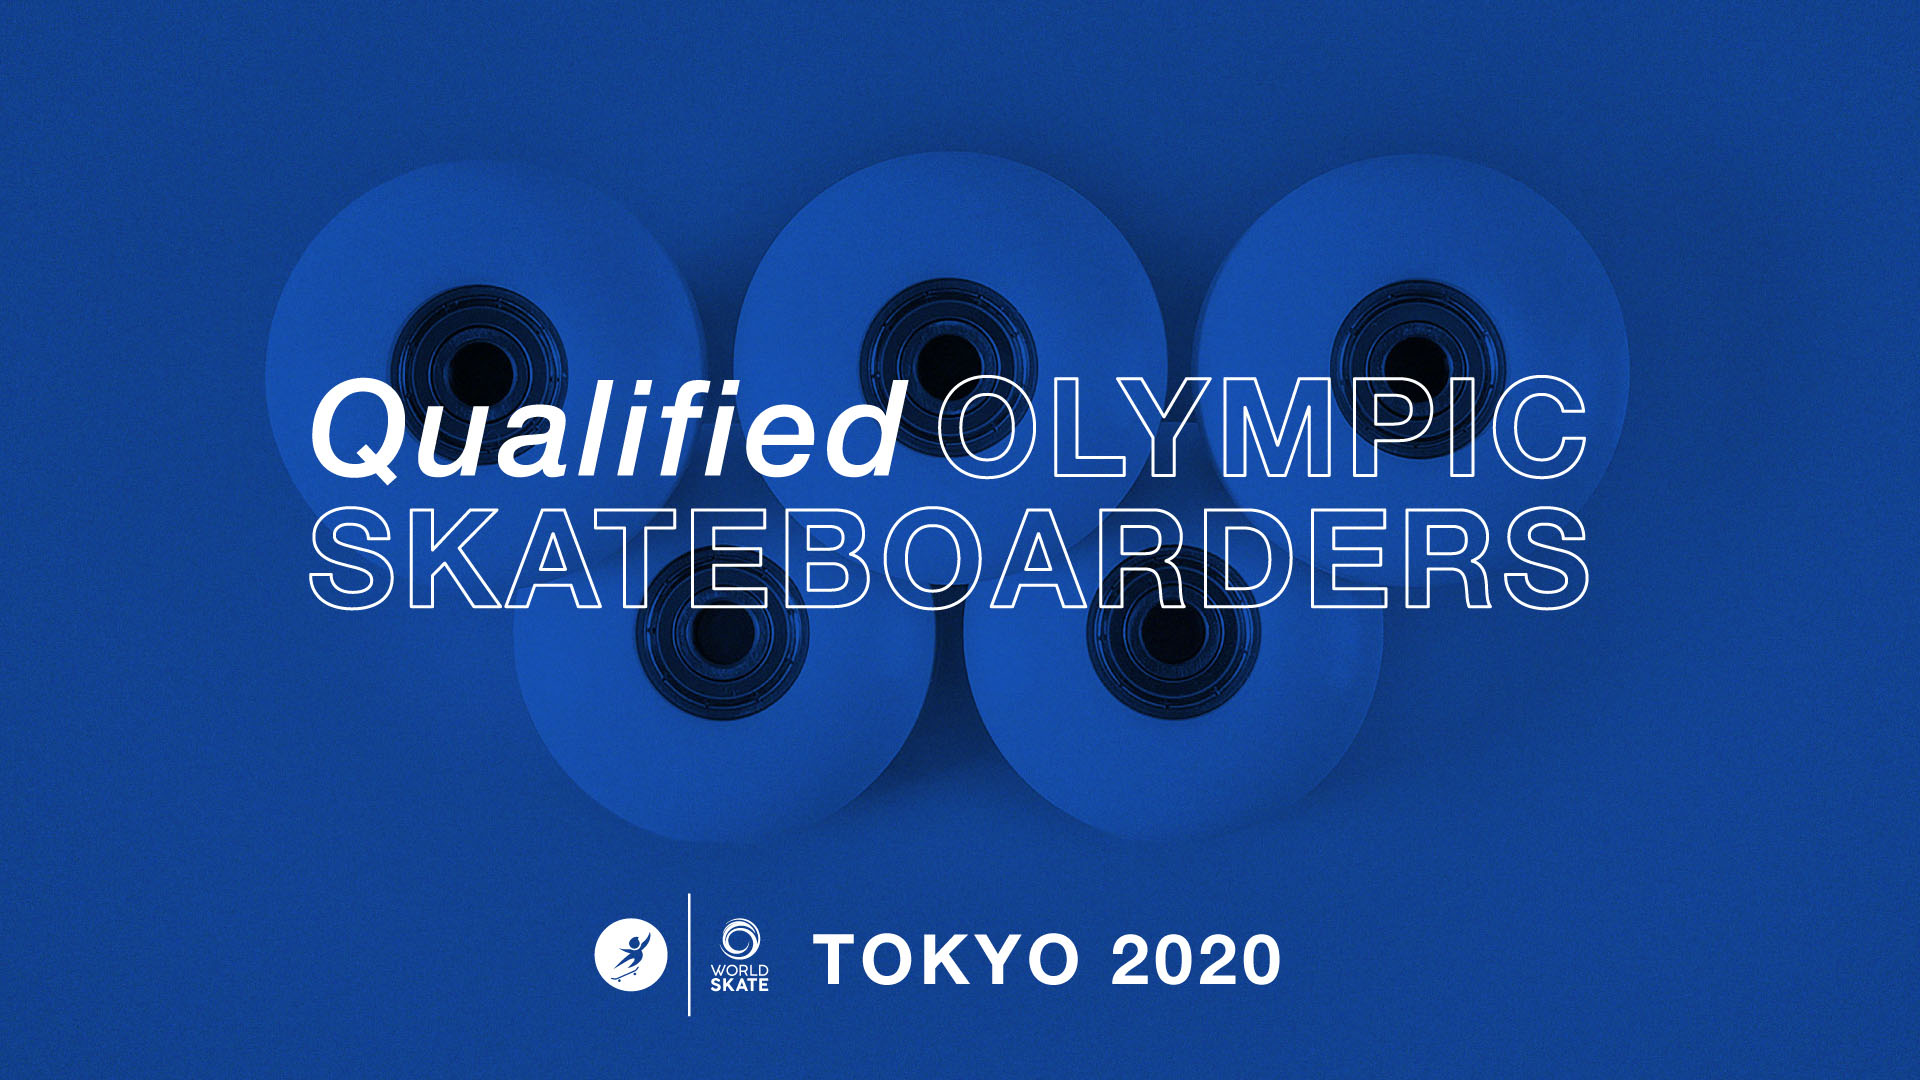 images/Rome/Qualified_Olympic_Skateboarders_wide.jpg